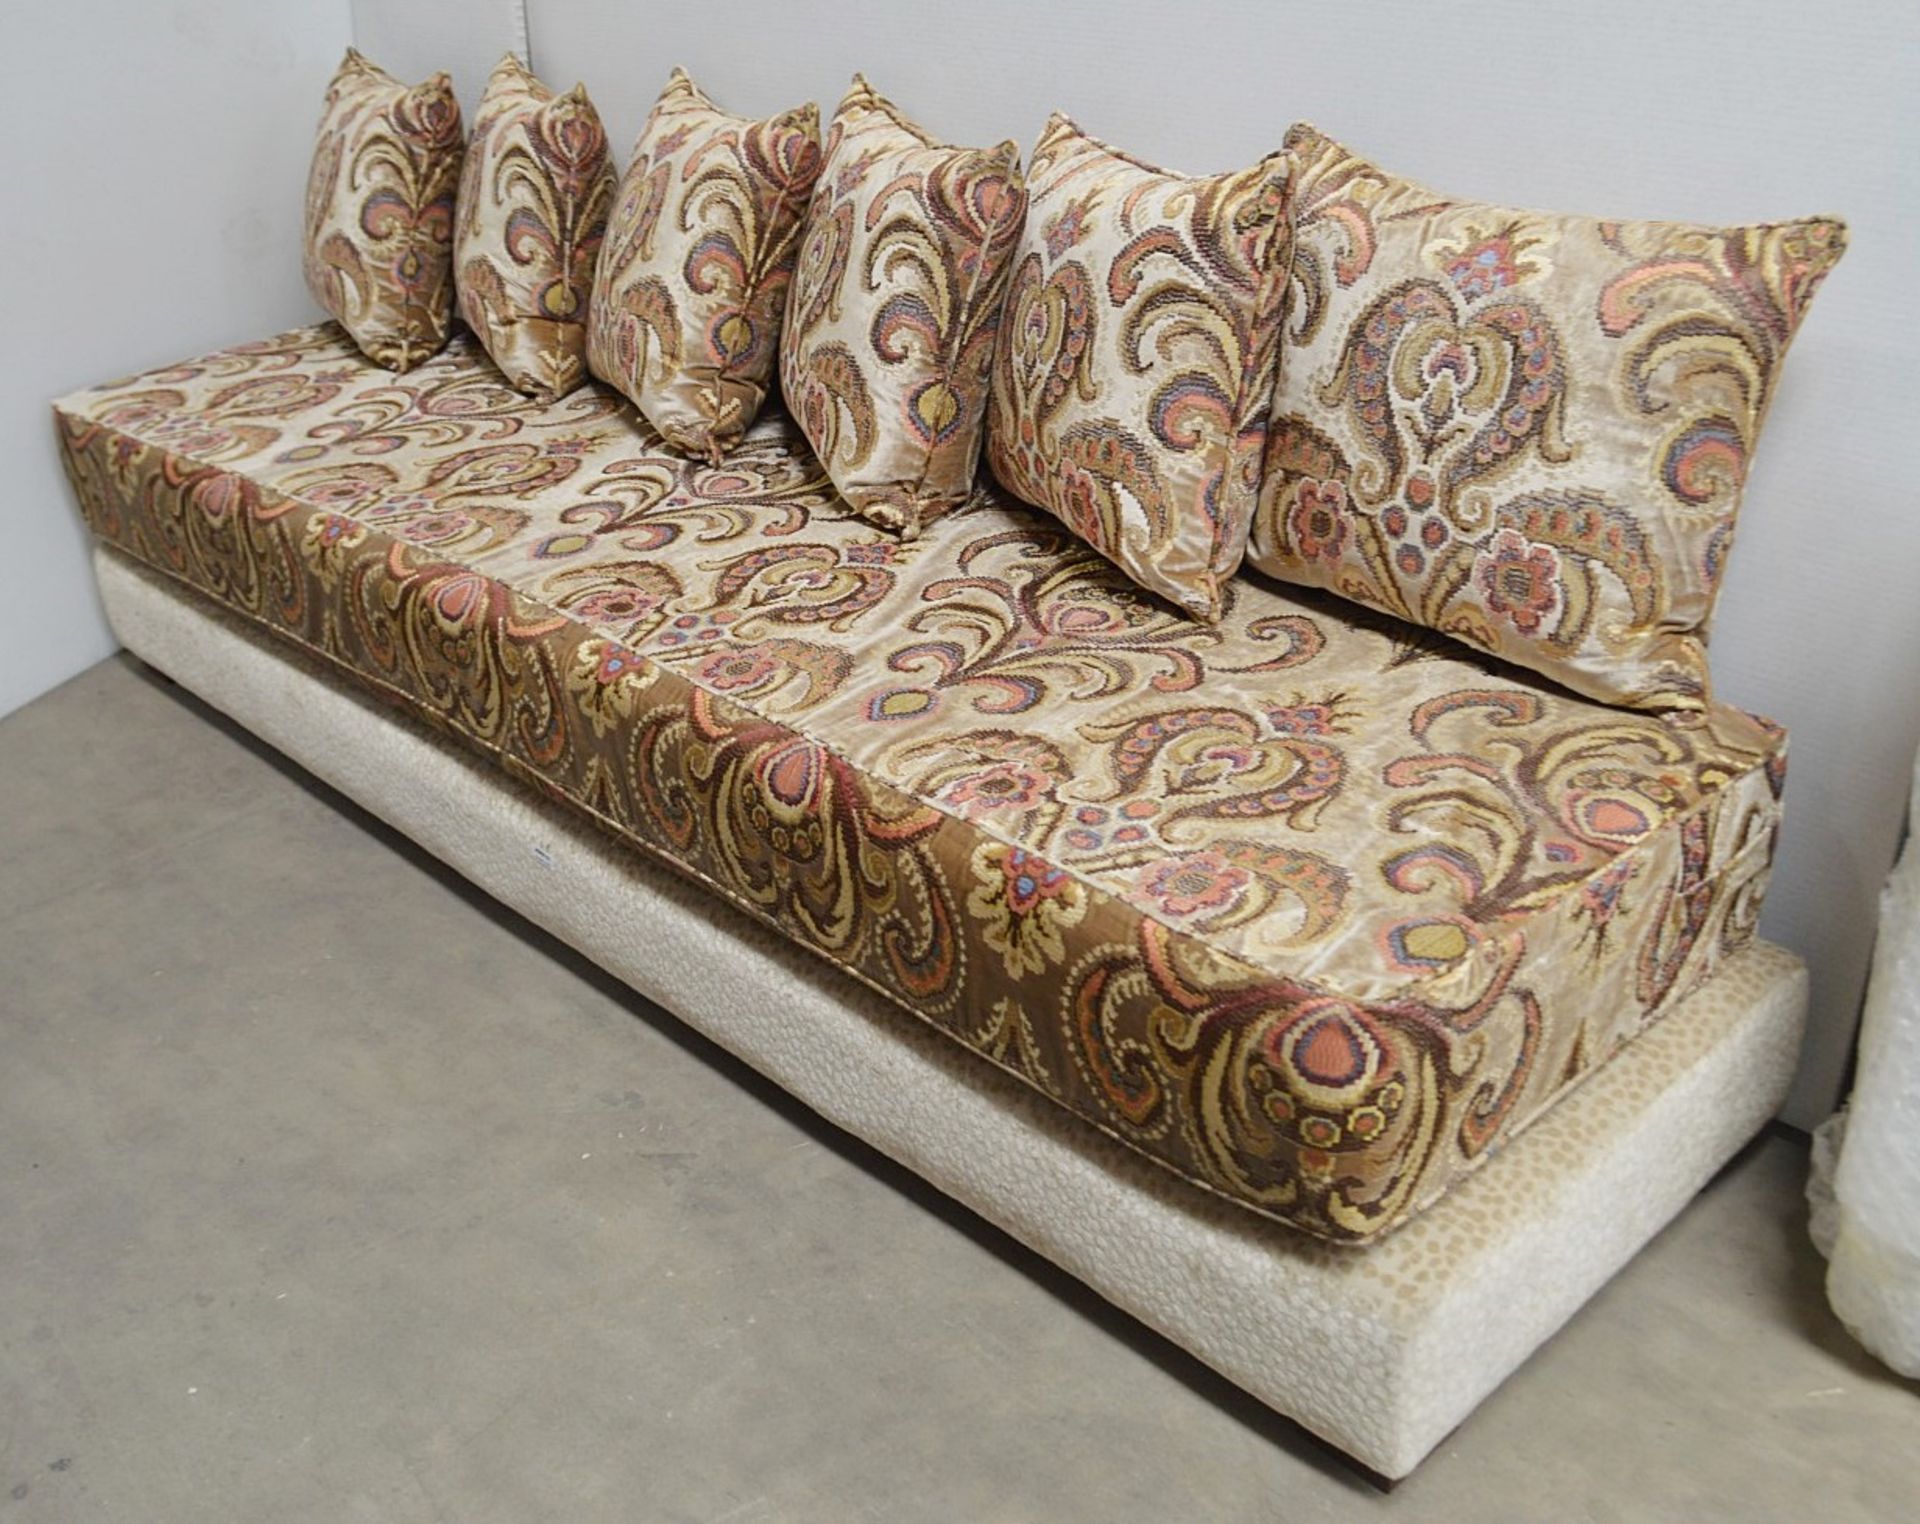 1 x Impressive 9ft Long Moroccan-style Seating Bench With Matching Footstool And 6 x Scatter - Image 7 of 9